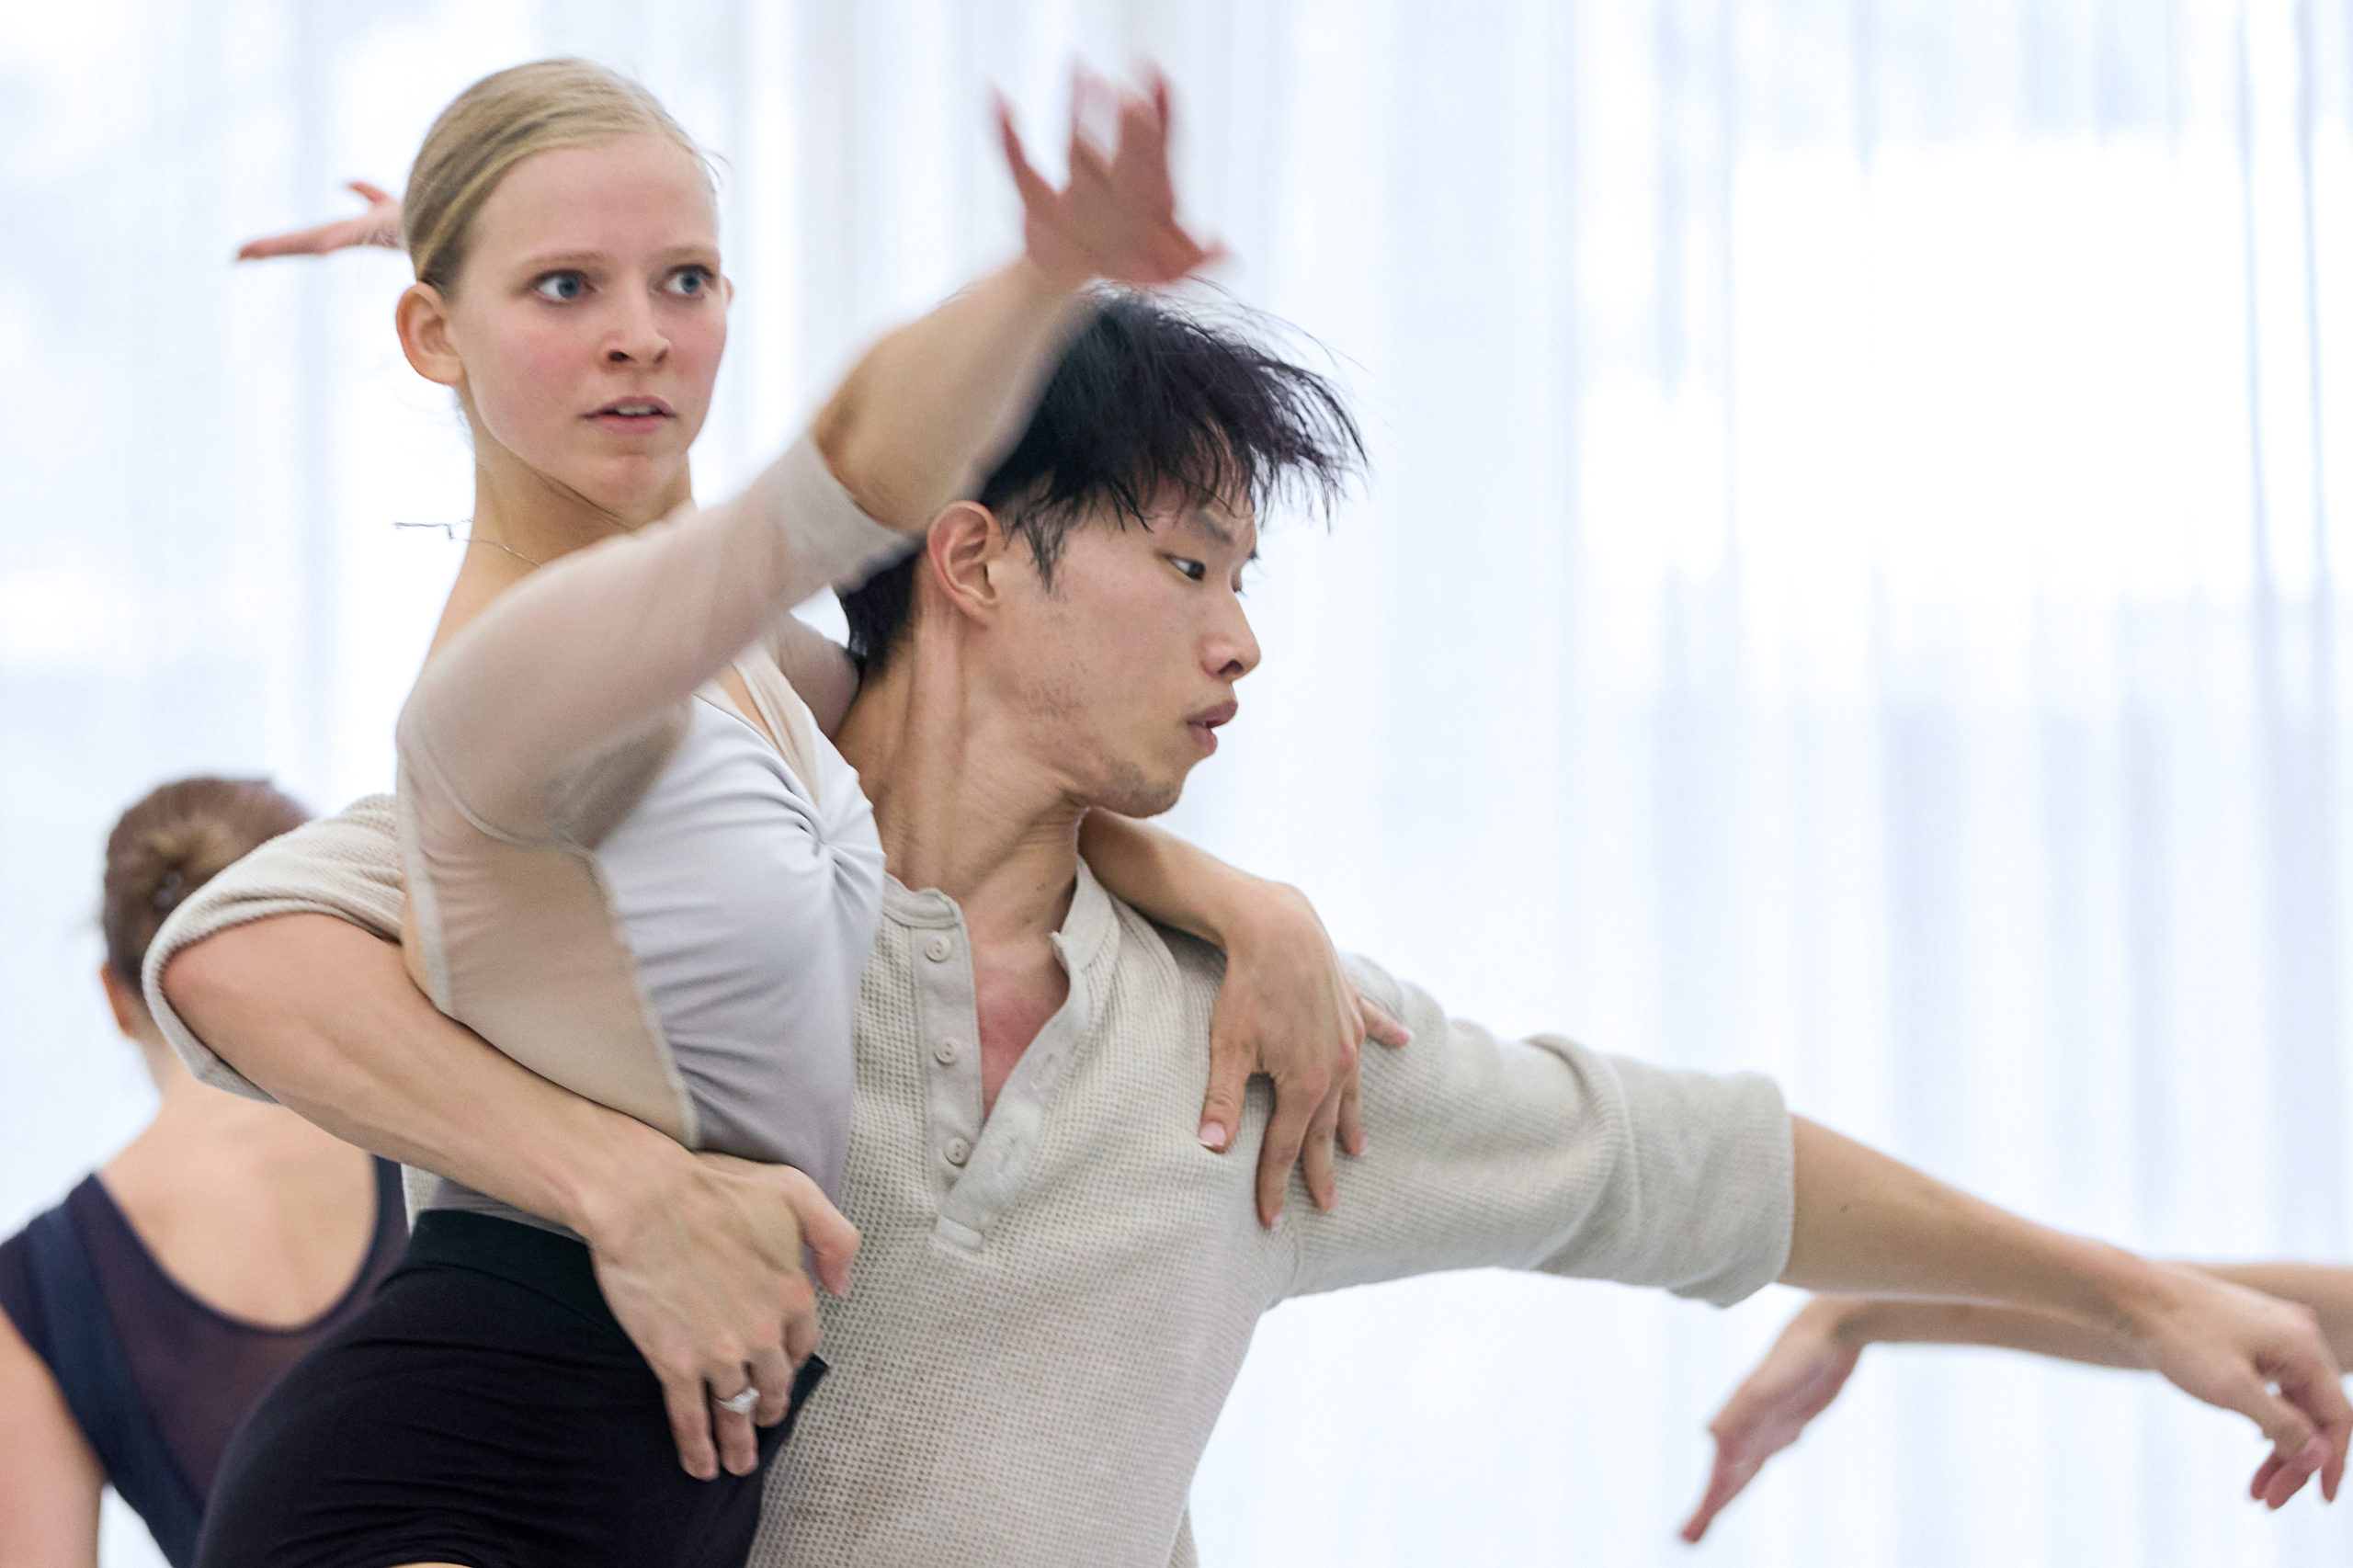 Shown hips-up in a brightly lit studio, Genevieve Penn Nabity and Kota Sato dance together. Sato holds Nabity around her back as she reaches forward intently in an arabesque.